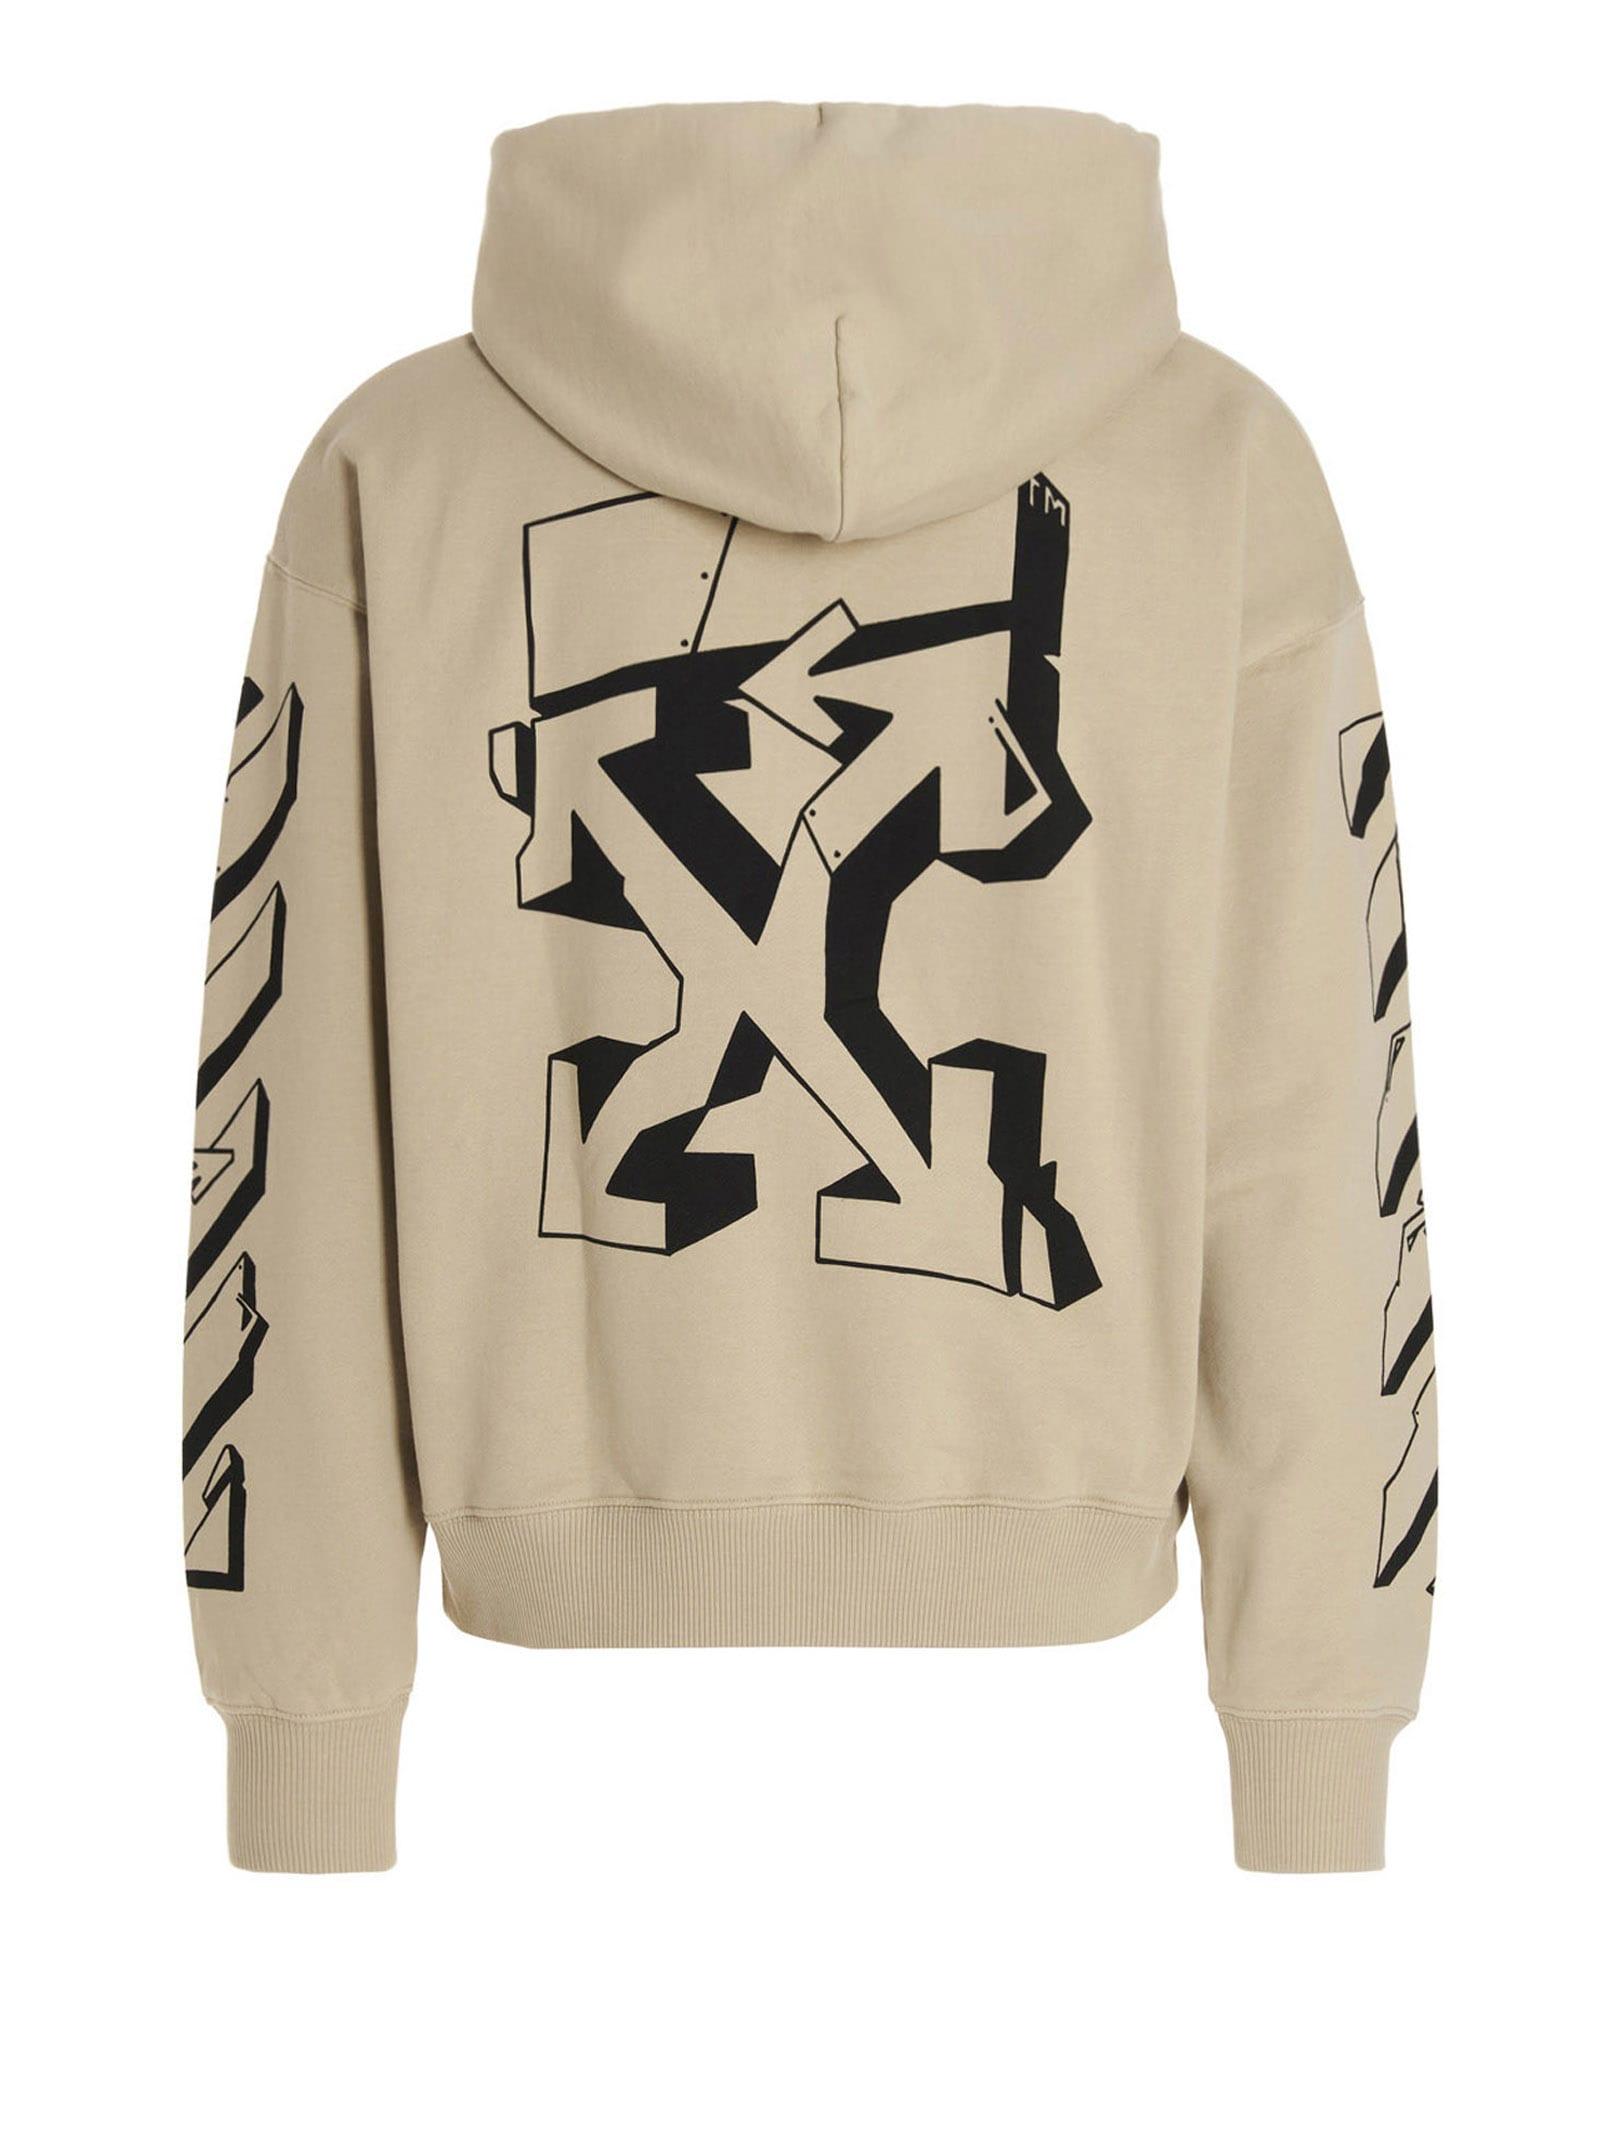 Off-White c/o Virgil Abloh Graffiti Hoodie in Natural for